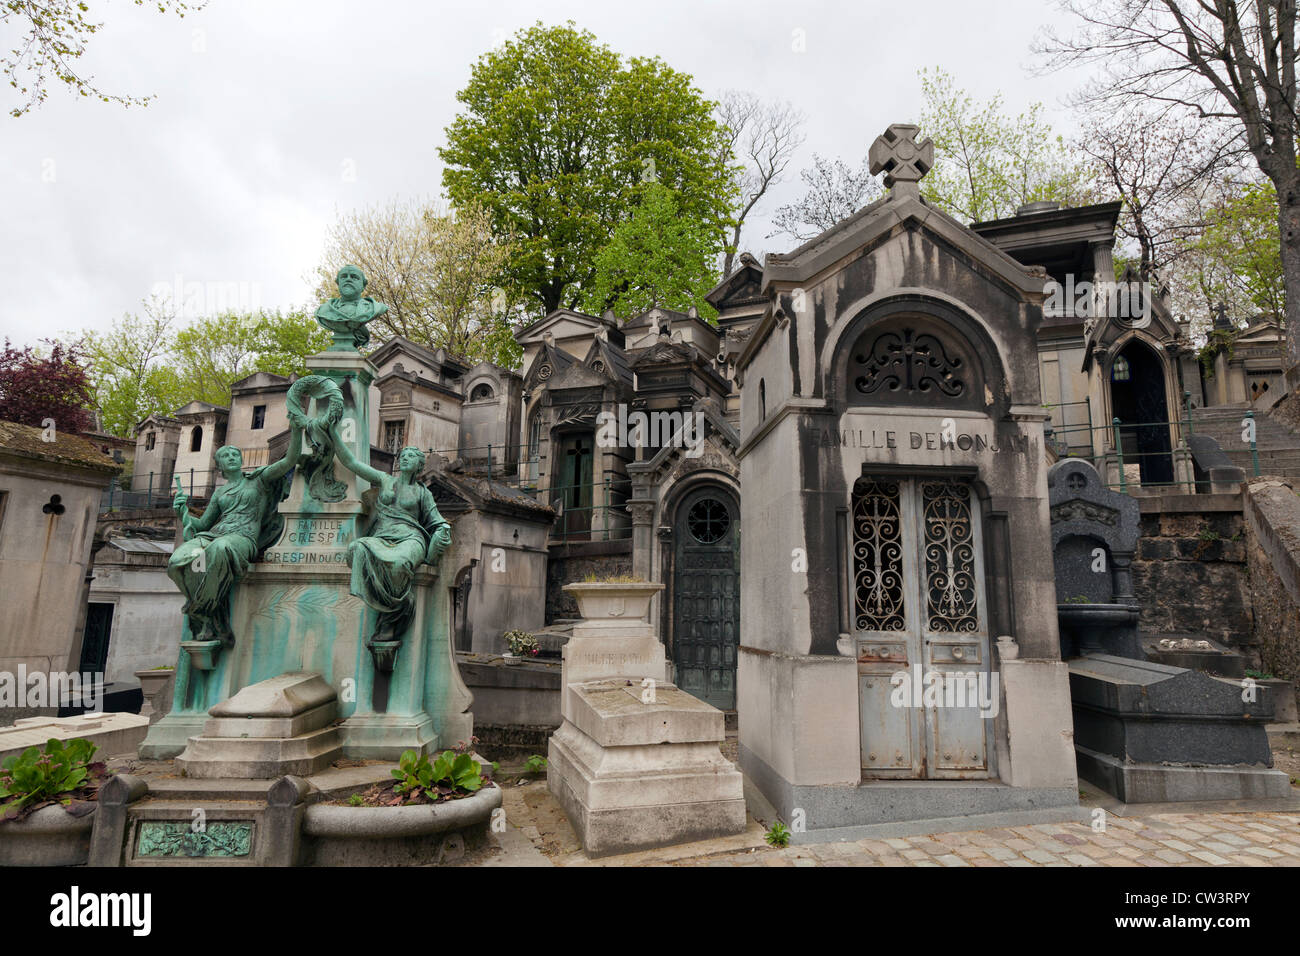 Row of tombs and sculpture at Pere Lachaise cemetery, Paris, France Stock Photo